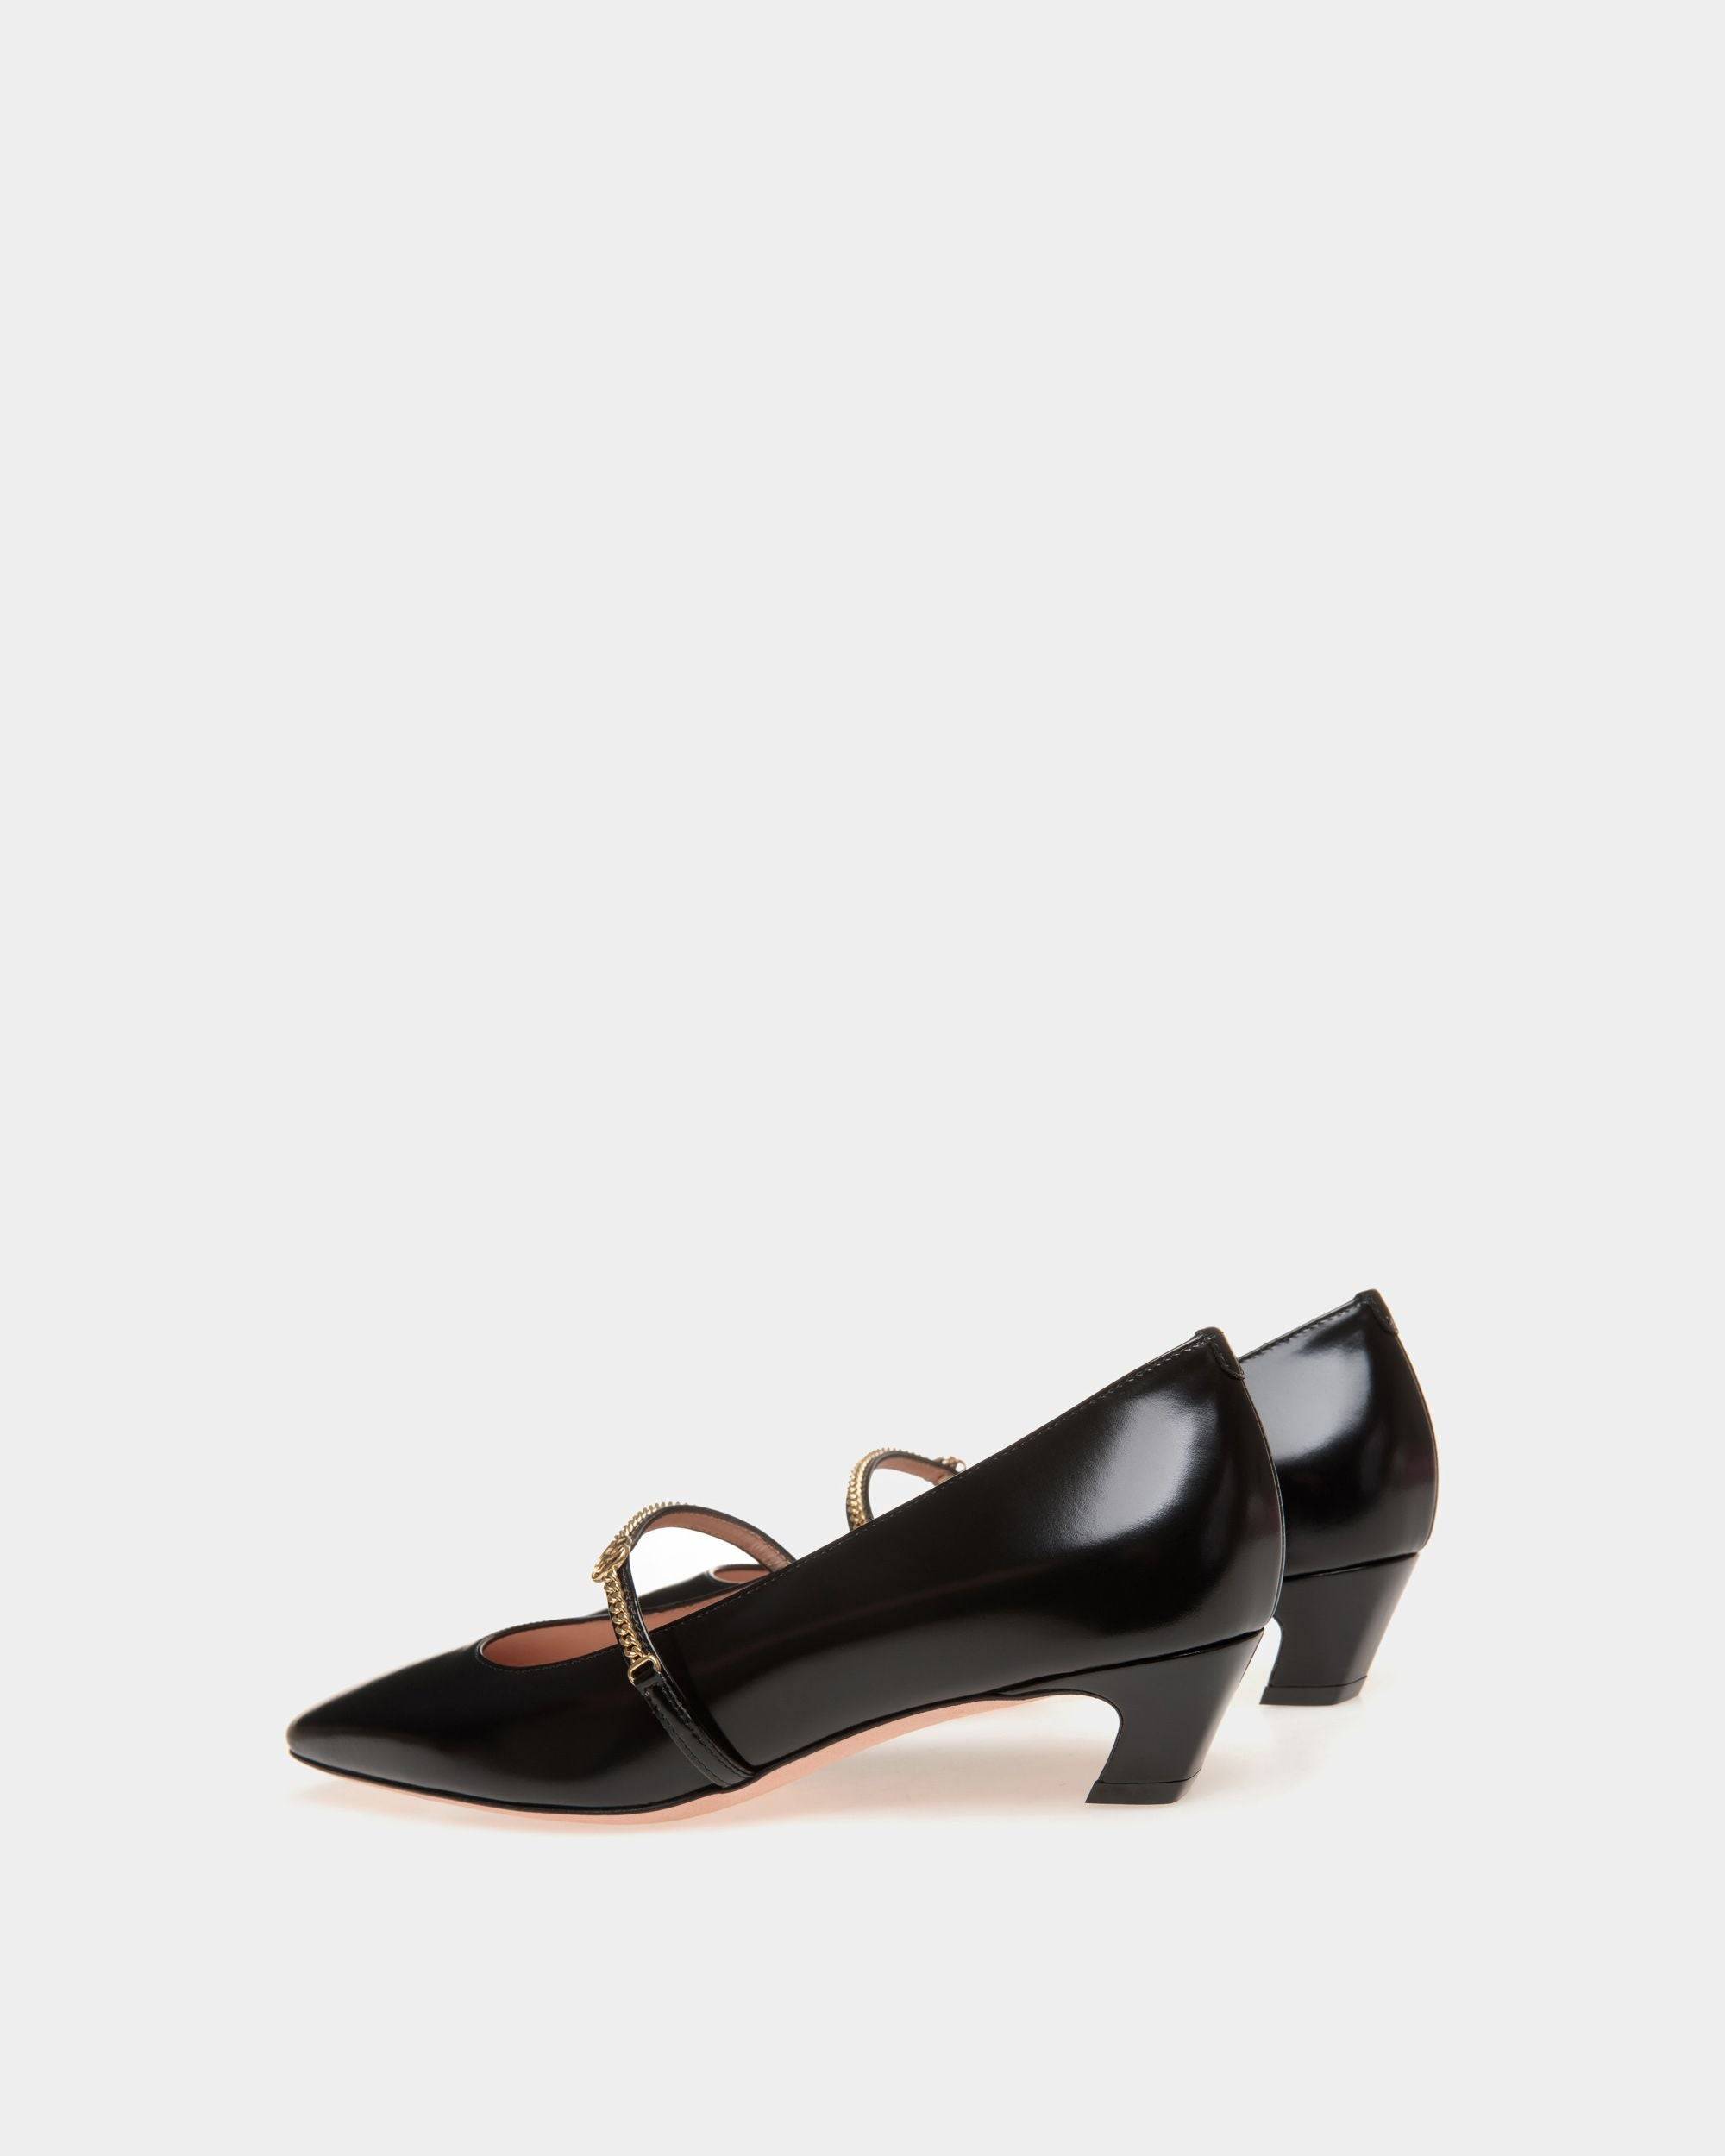 Sylt | Women's Mary-Jane Pump in Black Leather | Bally | Still Life 3/4 Back